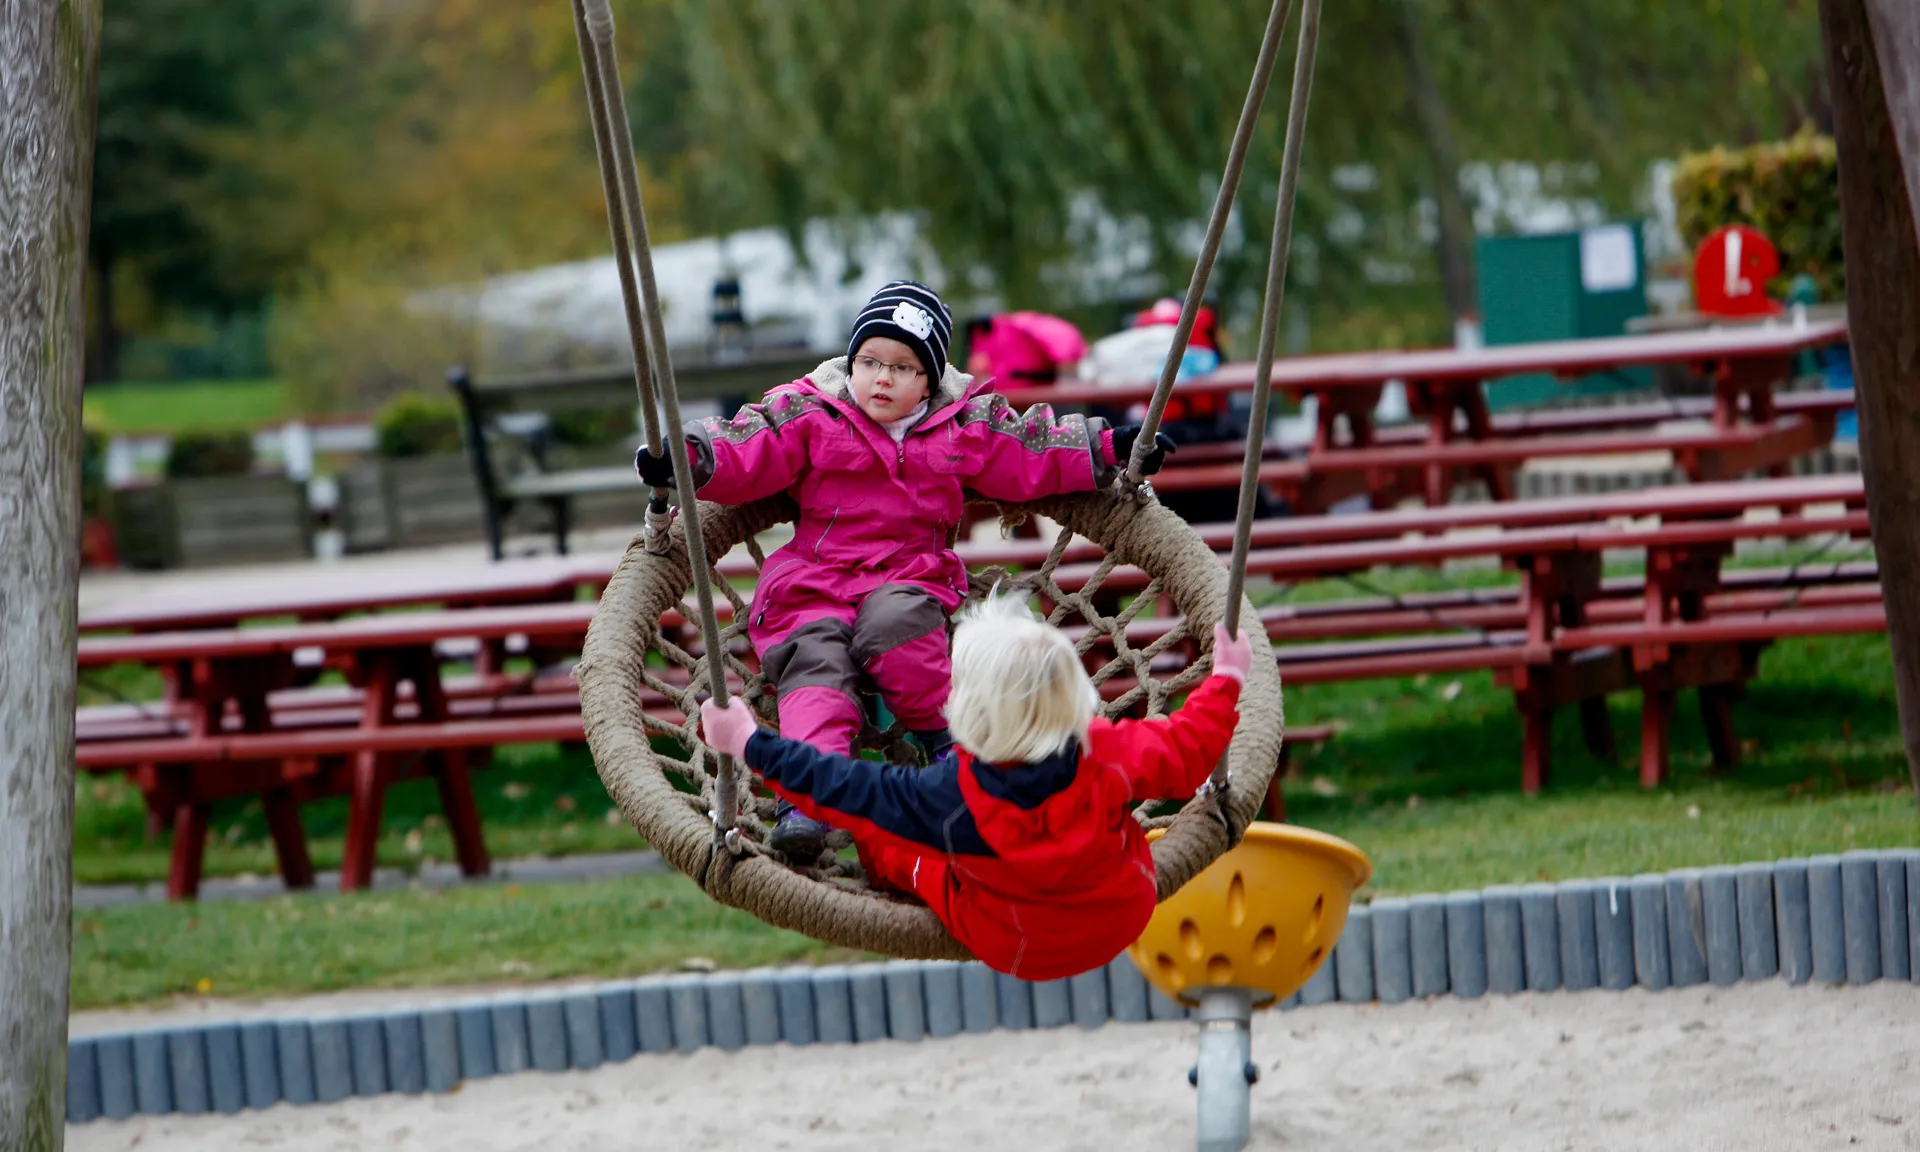 Children playing on a swing in the playground